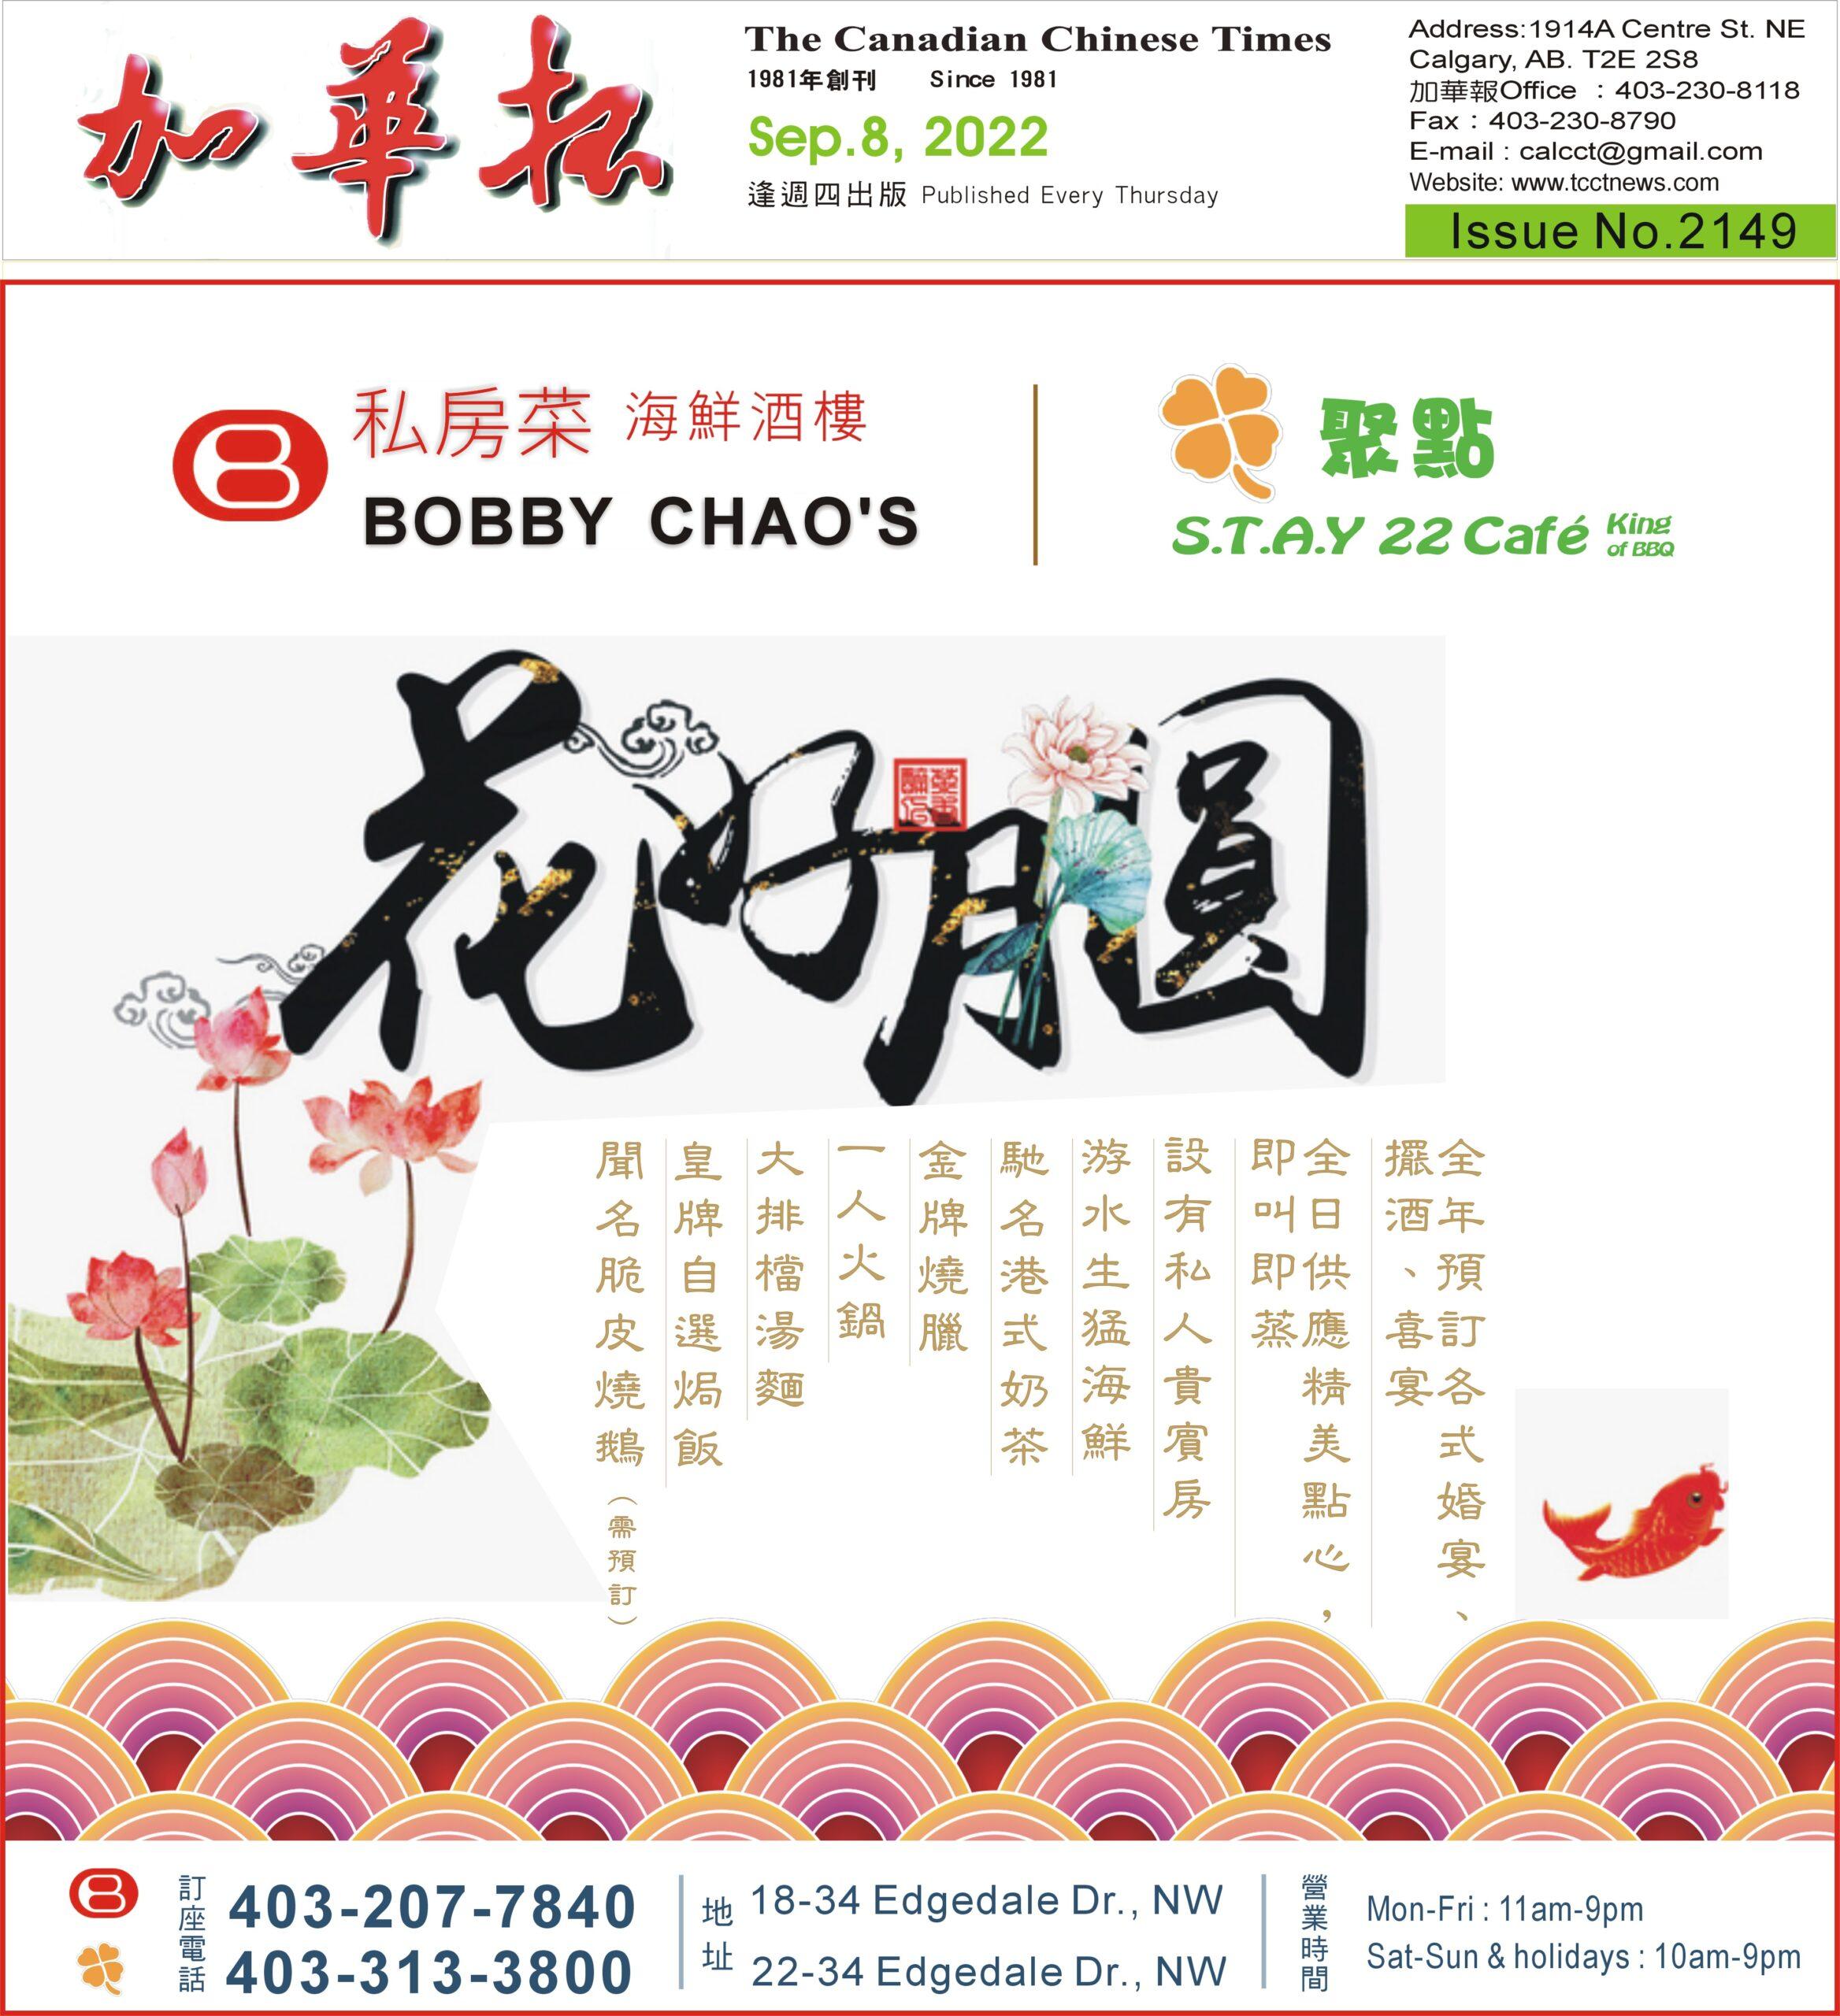 ISSUE #2149 September 8, 2022 | The Canadian Chinese Times